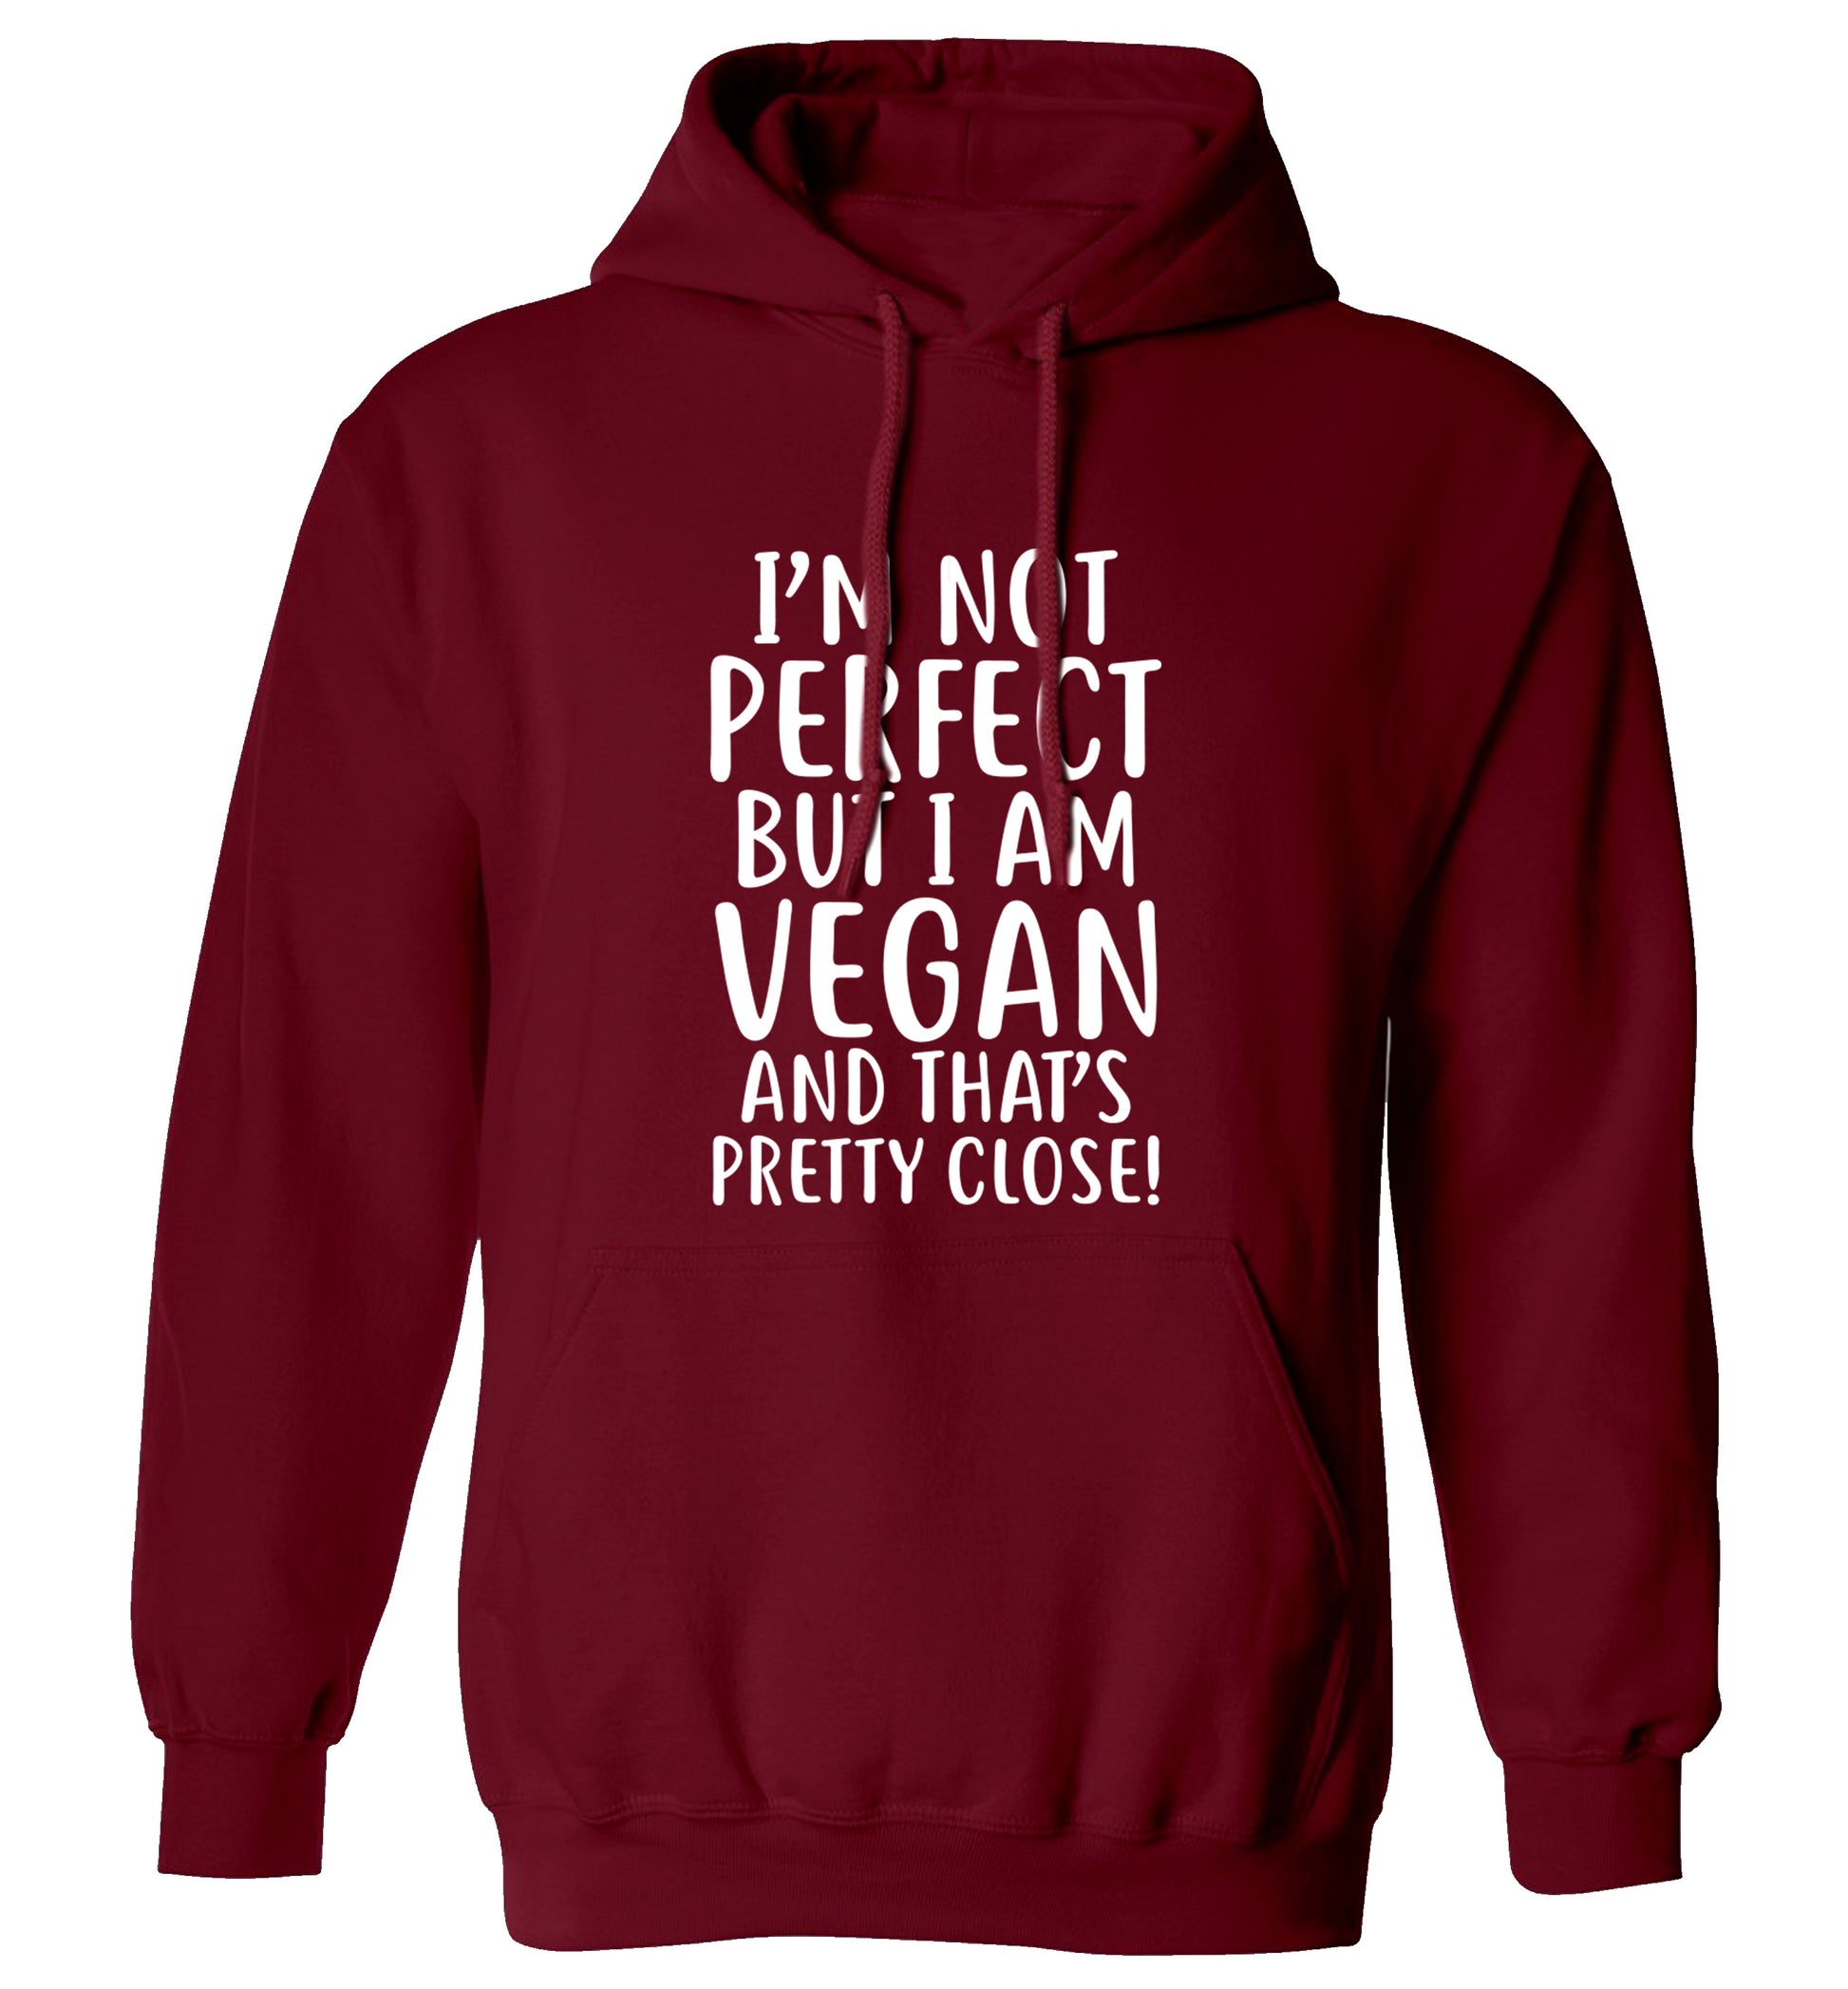 Might not be perfect but I am vegan adults unisex maroon hoodie 2XL